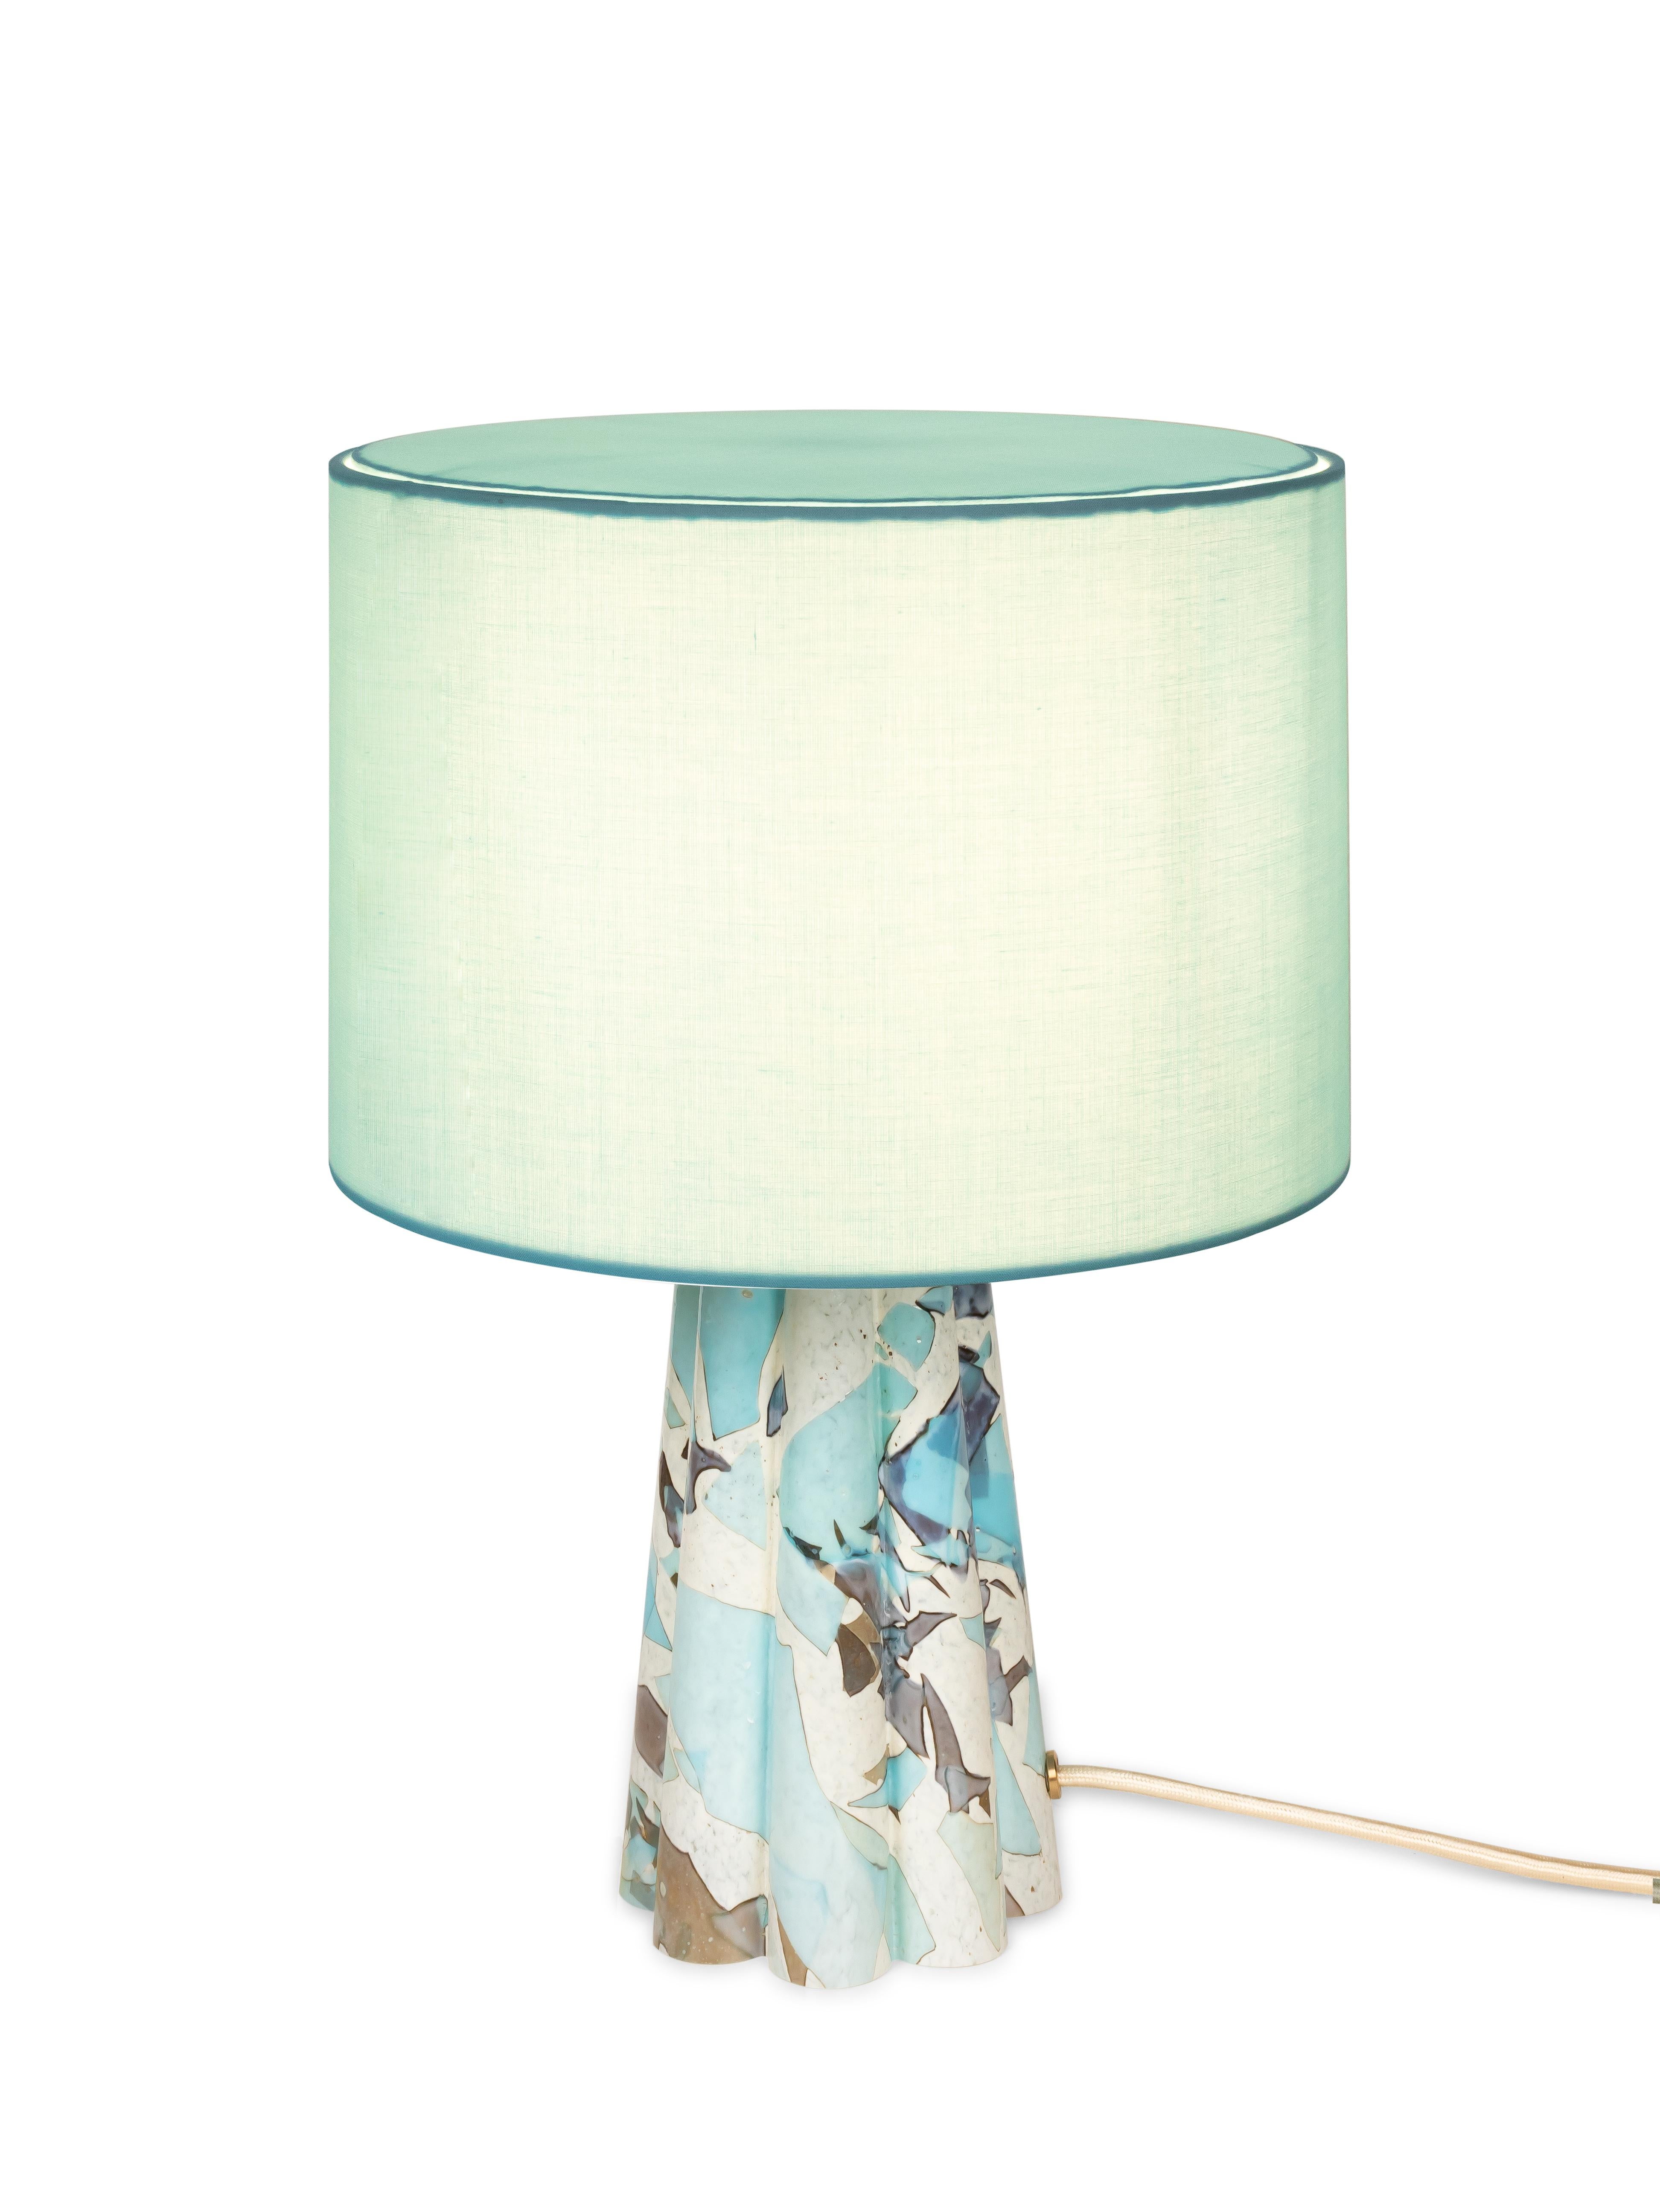 Contemporary Murano Glass Aquamarine Bucket Lamp with Cotton Lampshade by Stories of Italy For Sale